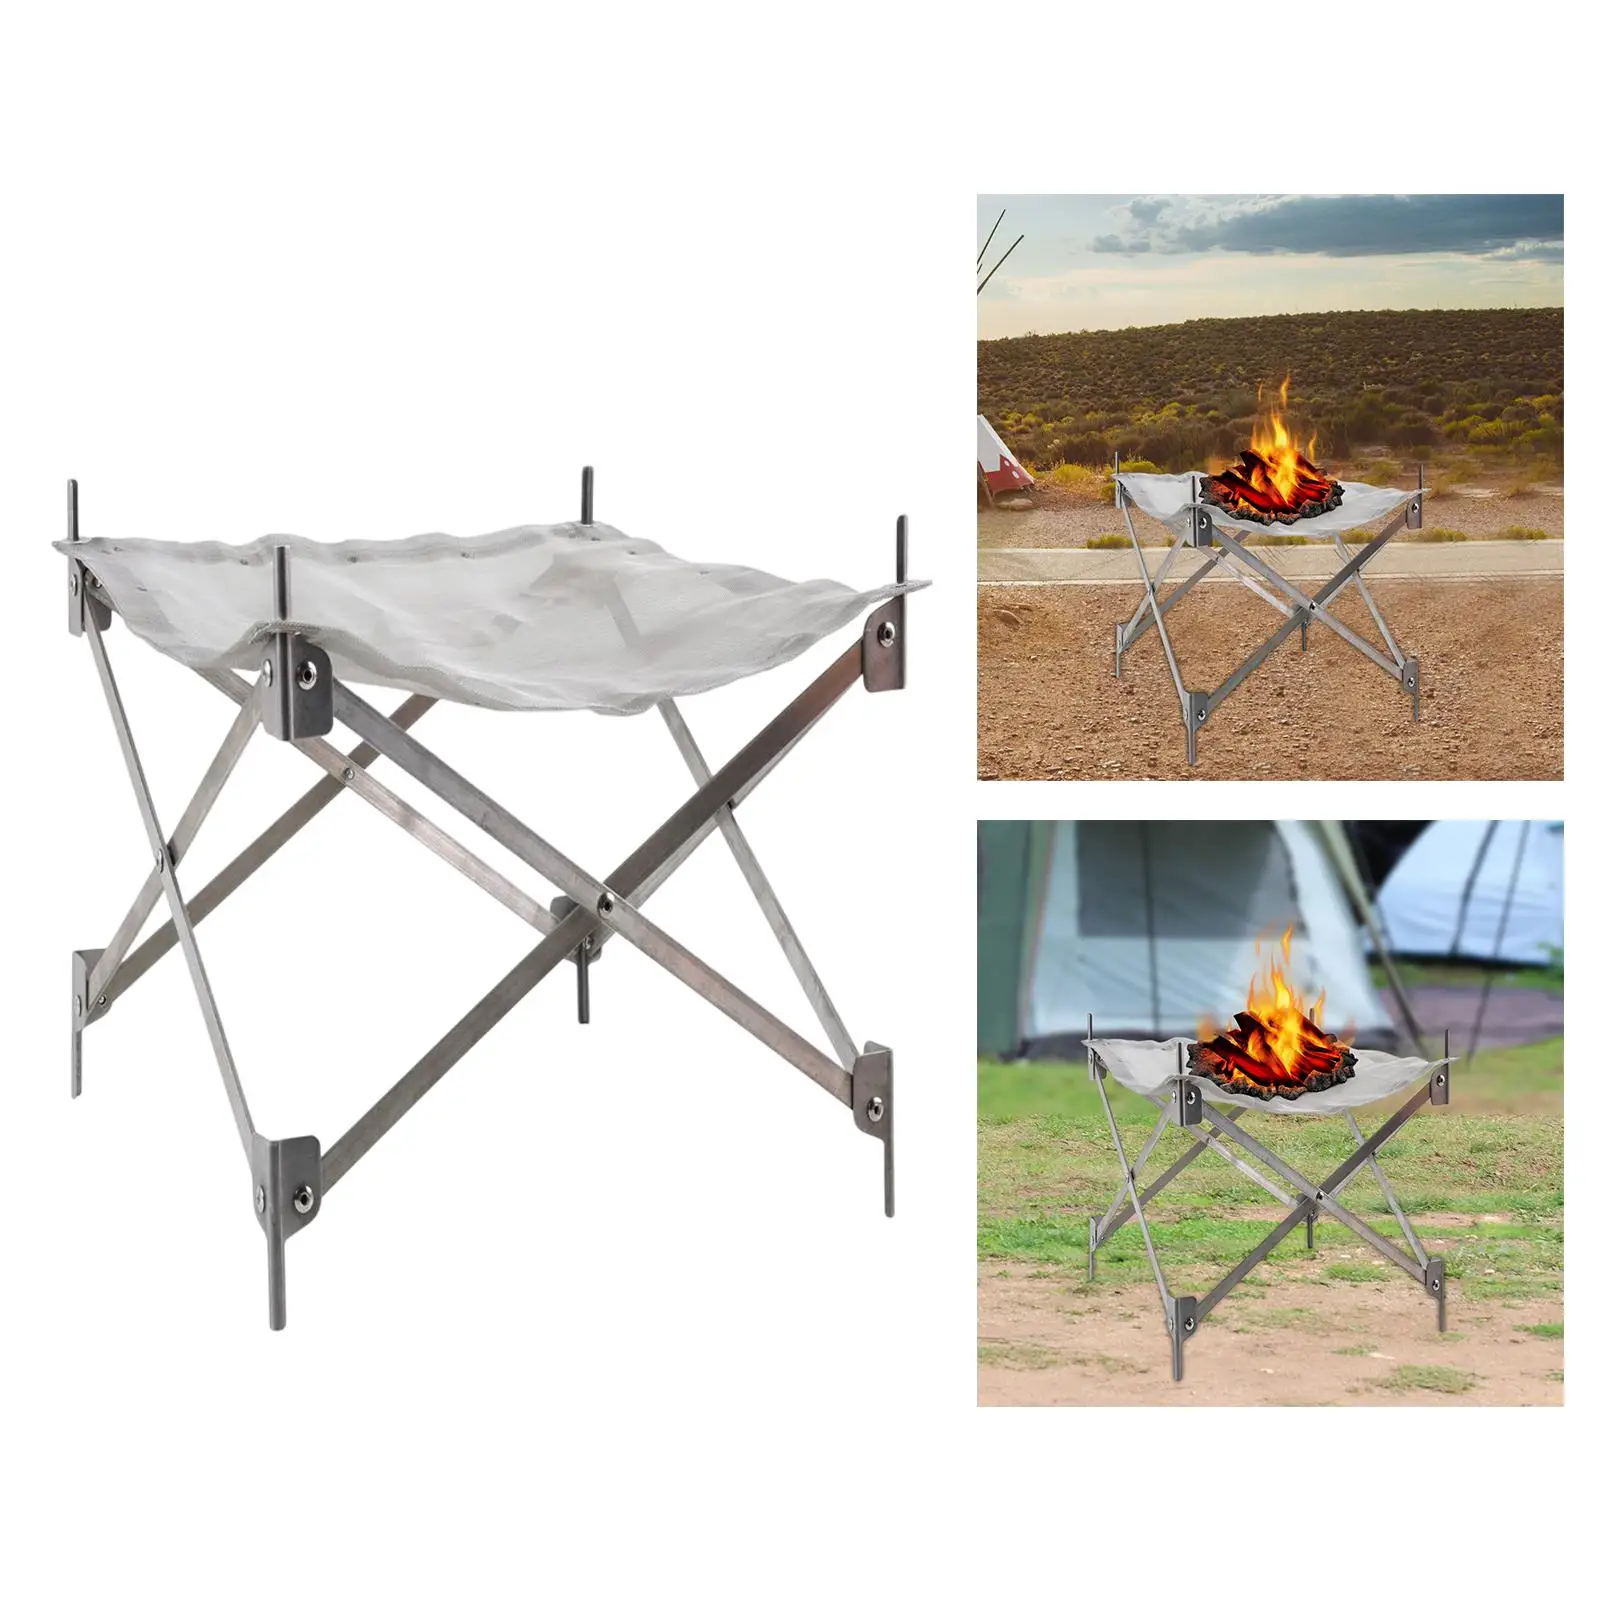 Folding Camping Grill Firepit Collapsible Fireplace Mesh Fire pits wood Burning bonfires for Frying BBQ Picnic Travel Barbecue